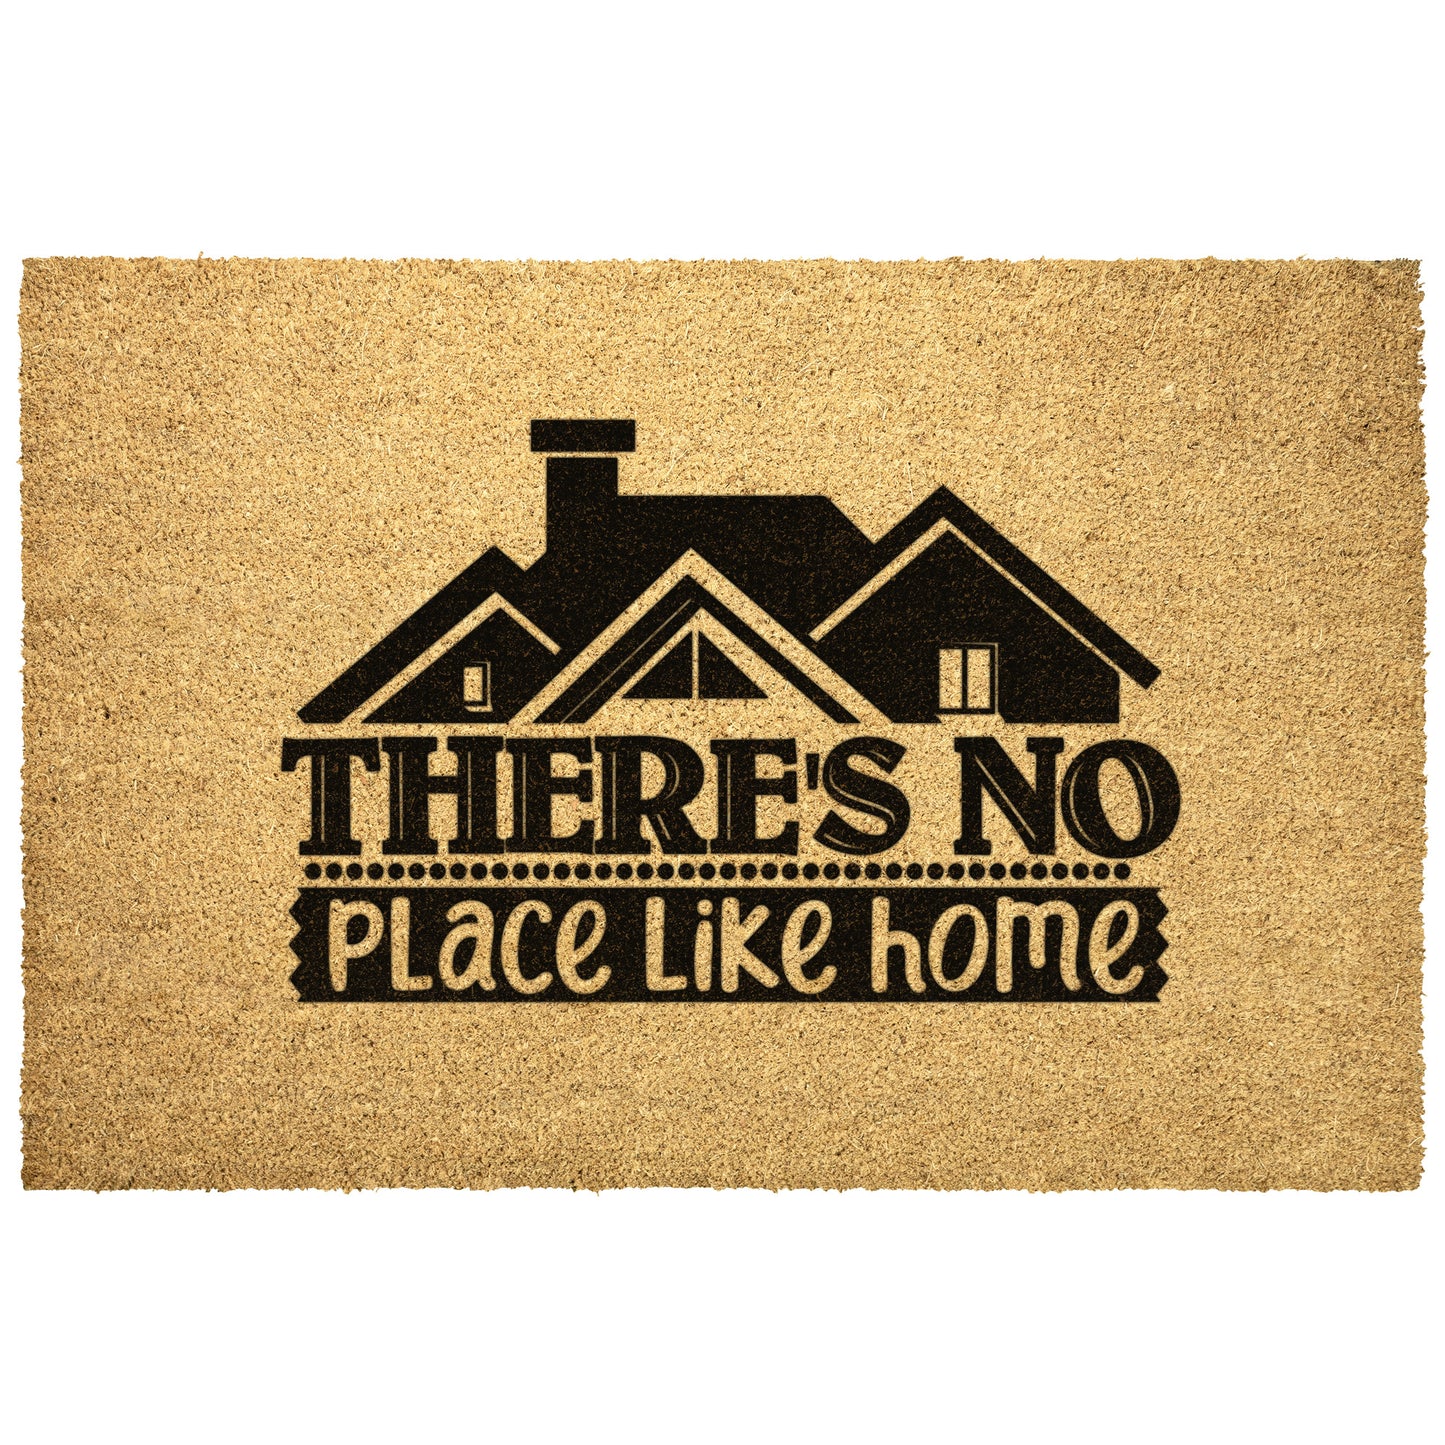 There's No Place Like Home, Mother's Day Gift, Welcome Door Mat, Home Doormat, Father's Day, Grandparents gift